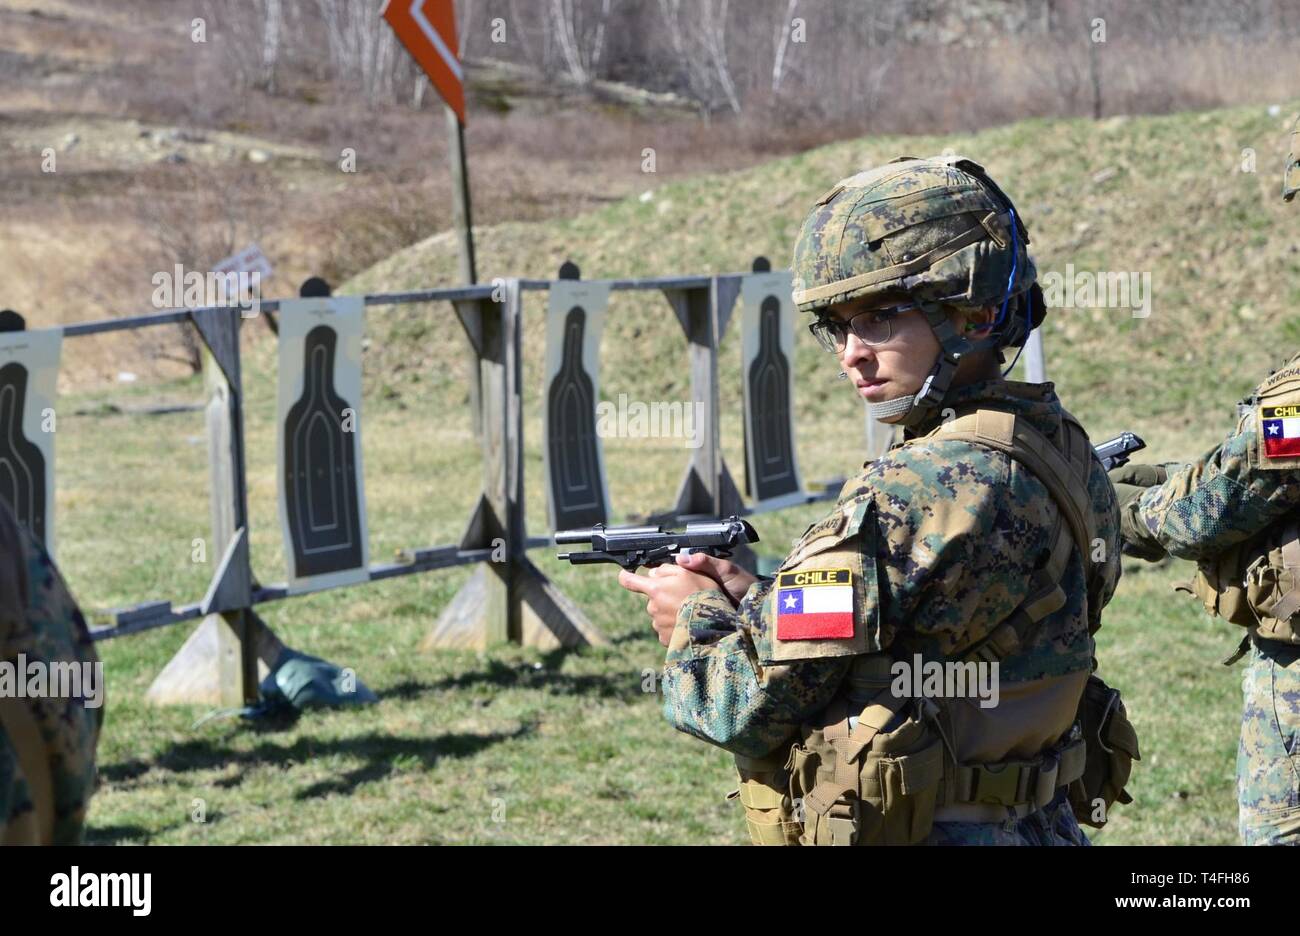 A Chilean cadet from the Bernardo O'Higgins Military School, Chile, takes part in an M9 pistol range in preparation for the 51st Sandhurst Military Skills Competition in West Point, New York, April 12-13. Sandhurst, a premier international military academy competition which began in 1967, is a two-day, approximately 30-mile course filled with individual and squad-based events designed to promote military excellence of future leaders across the world. This year, 49 teams from more than a dozen countries will participate in the competition, with two first-time teams competing from Denmark and Gr Stock Photo